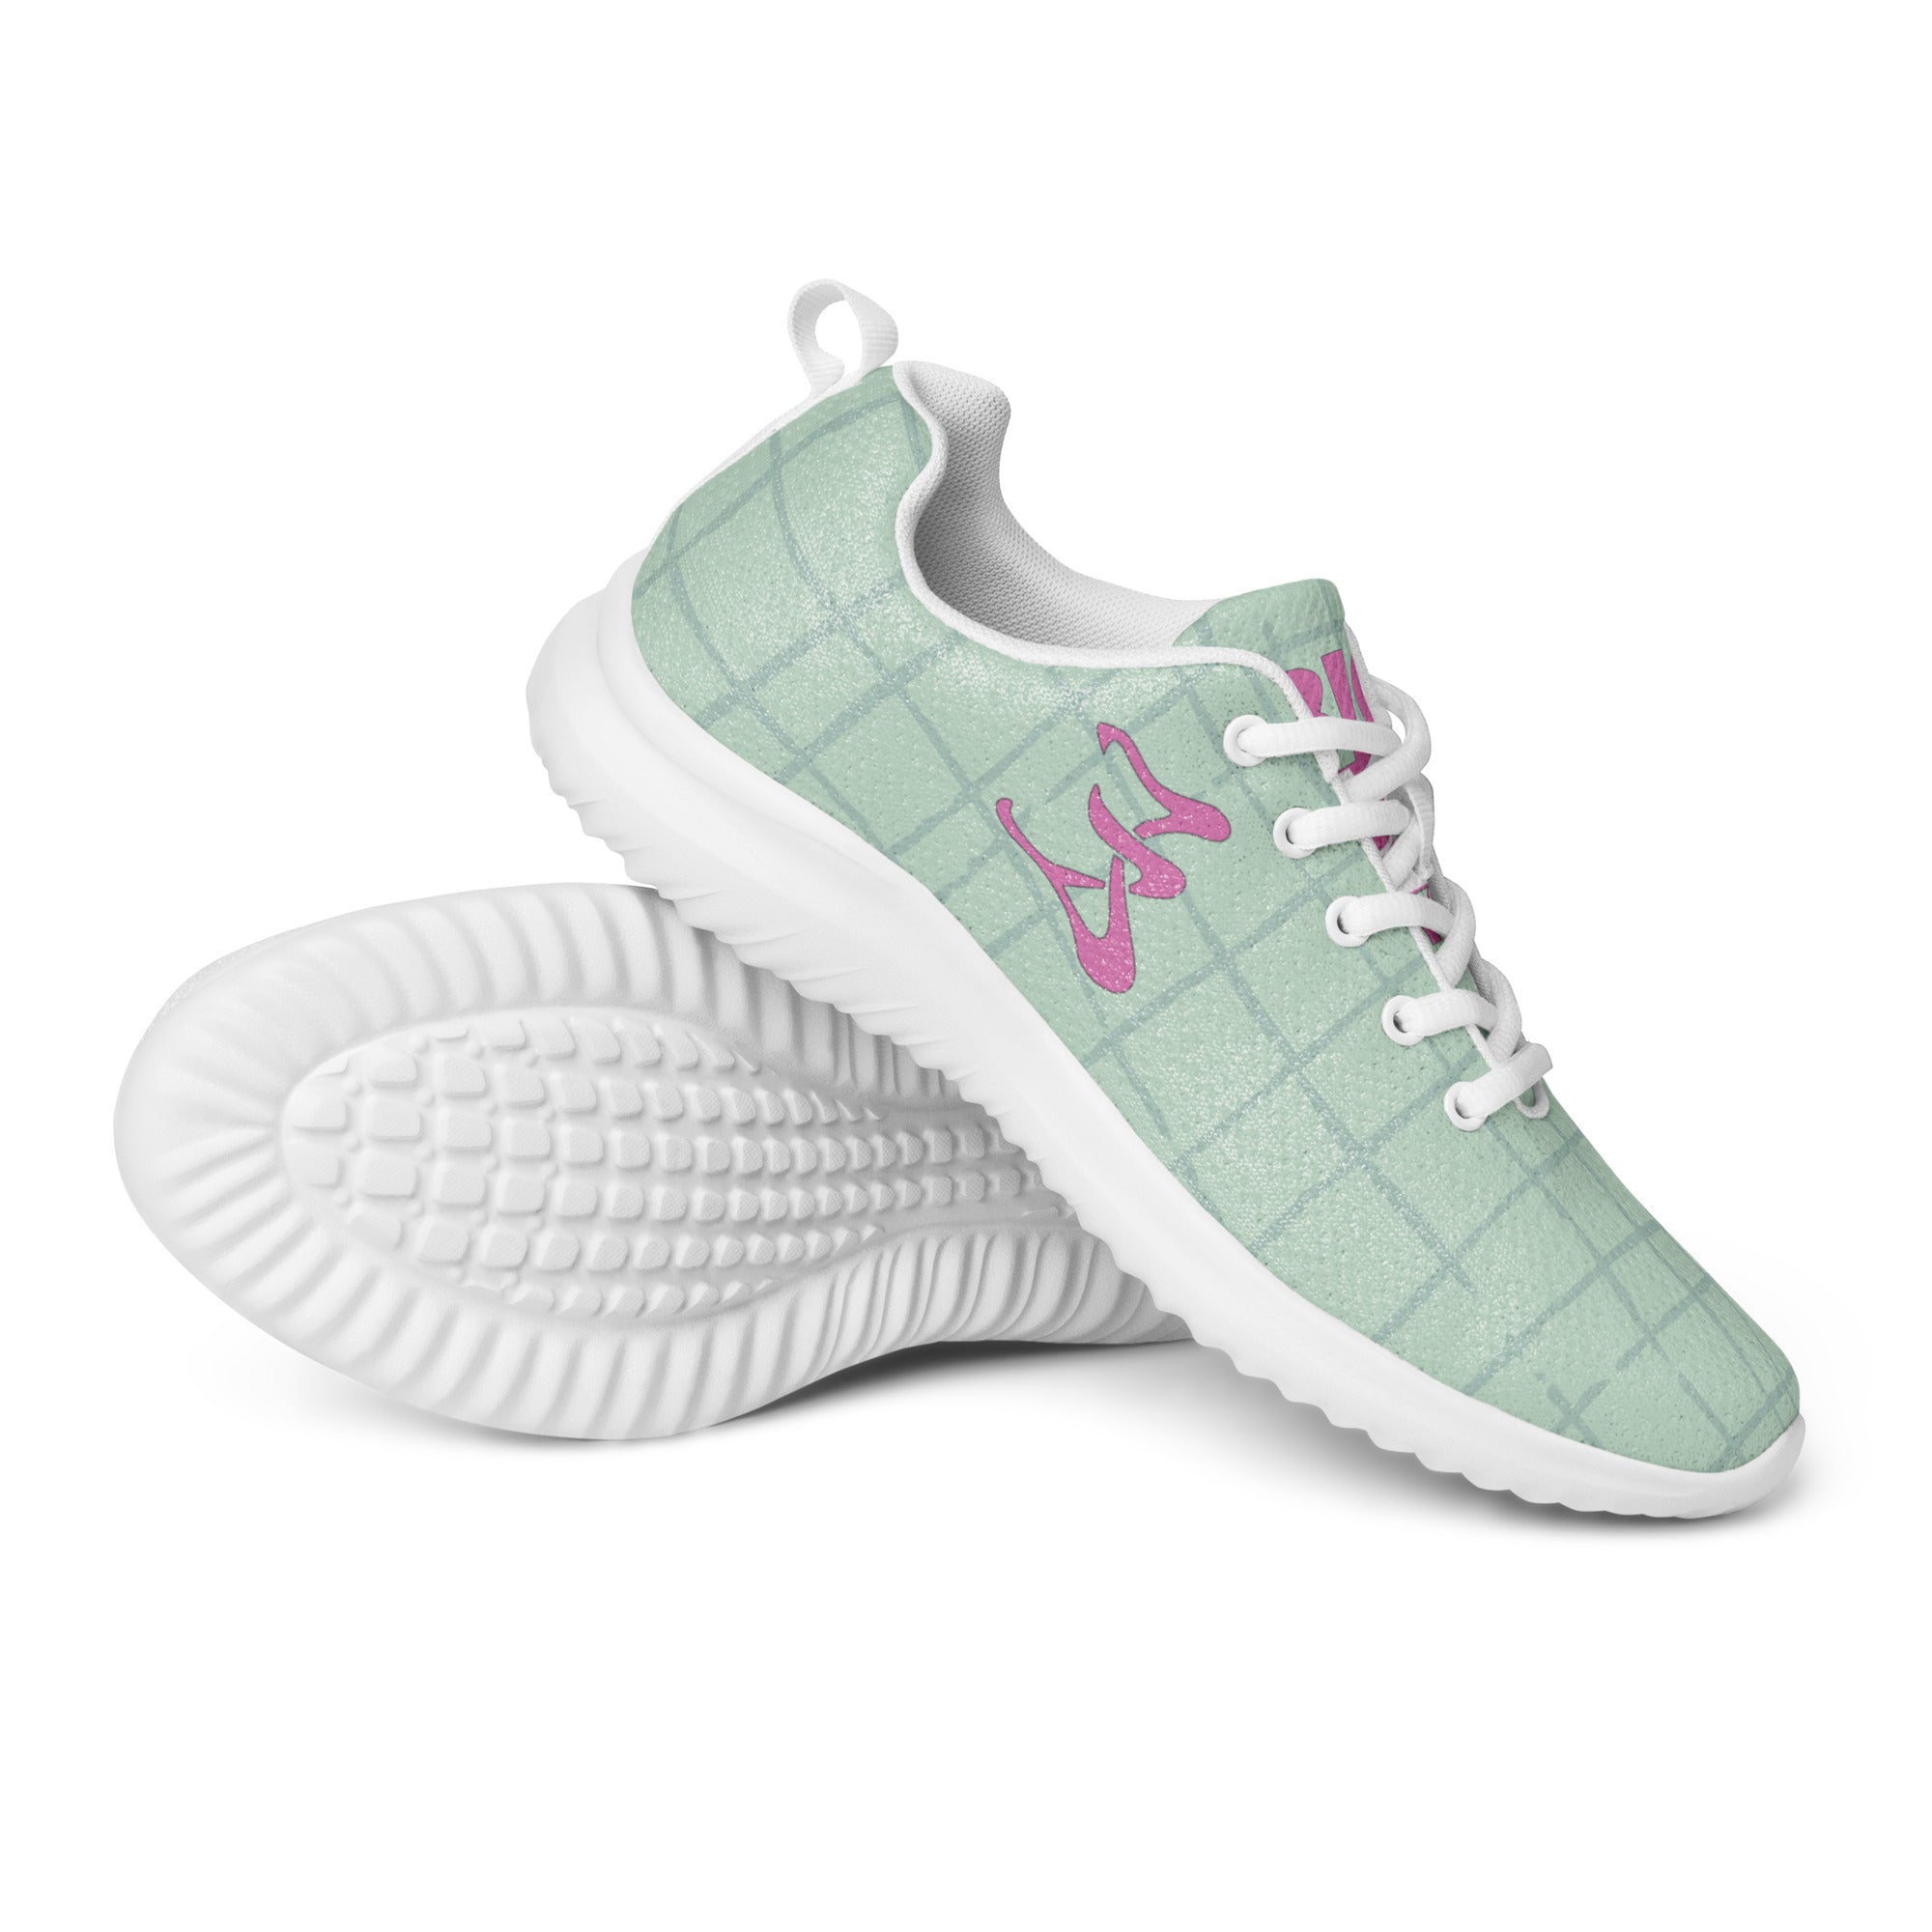 Women’s athletic walking shoes turquoise